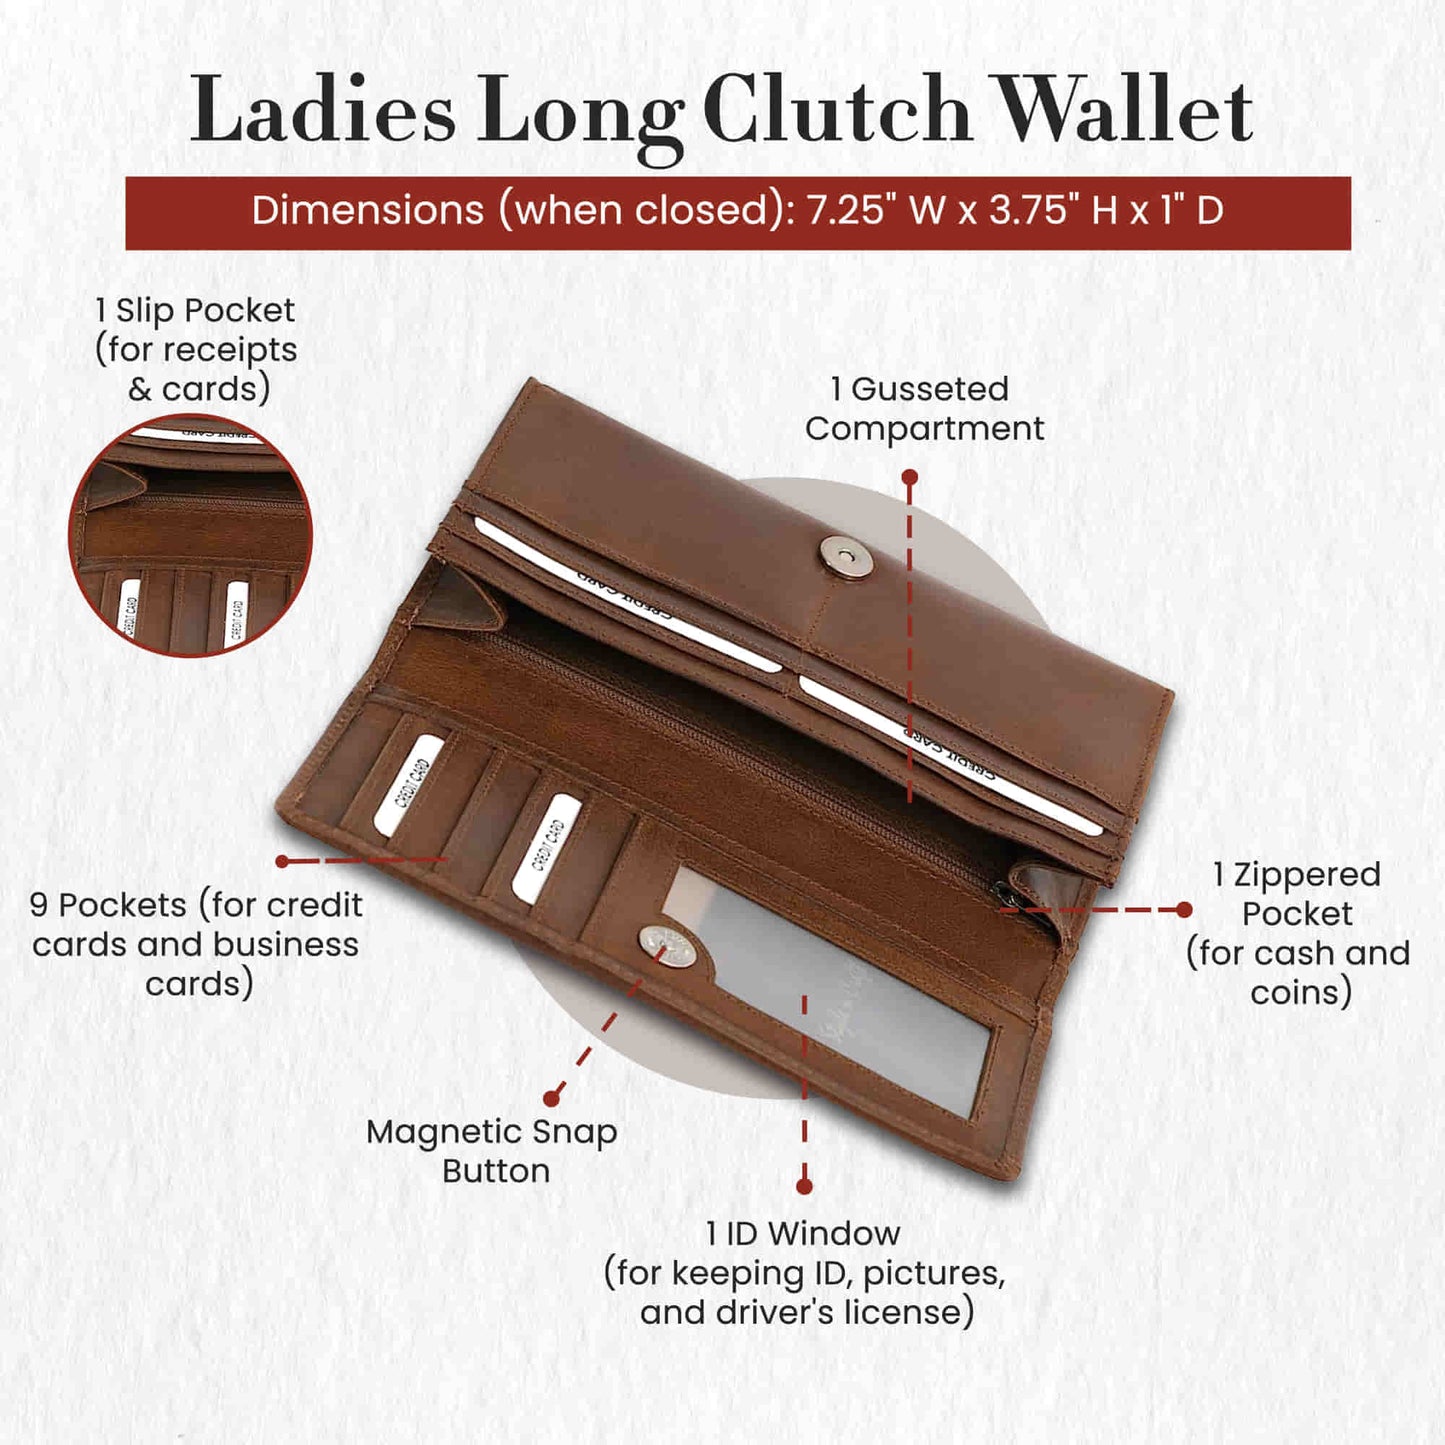 Style n Craft 391103 Ladies Long Clutch Wallet in Oak Color Leather - Open View Showing the Details